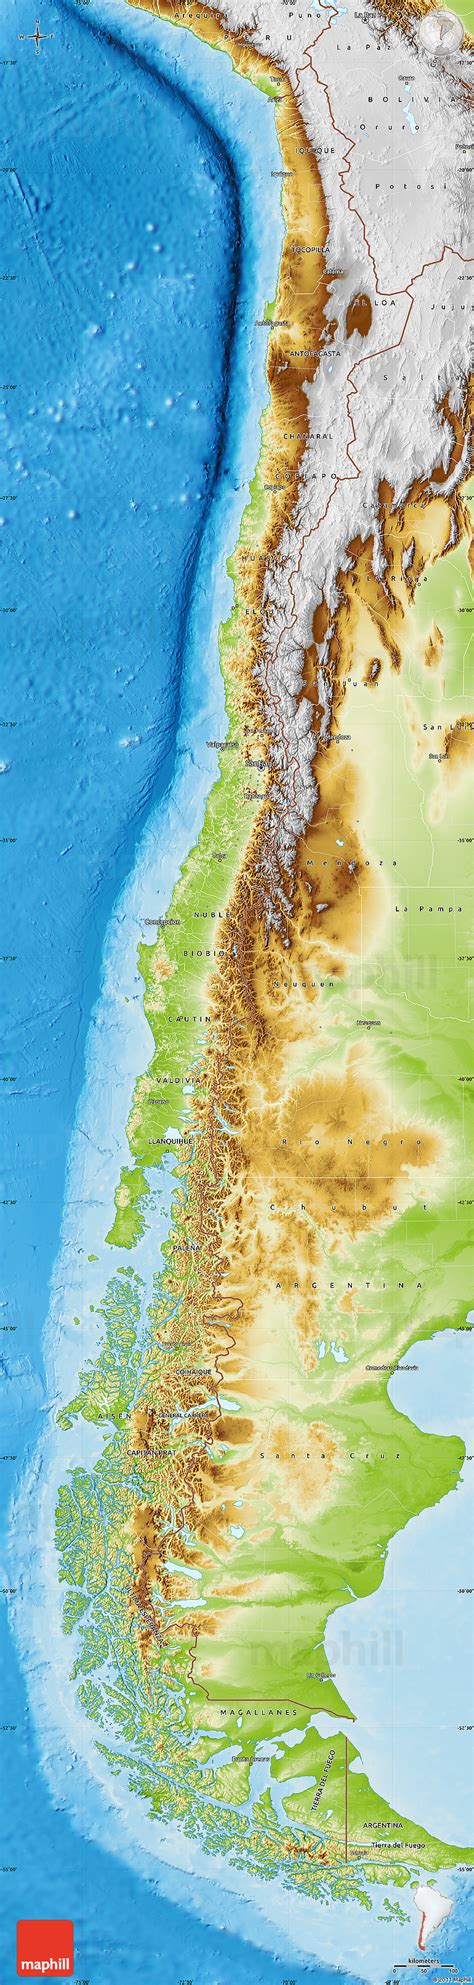 Physical Map of Chile